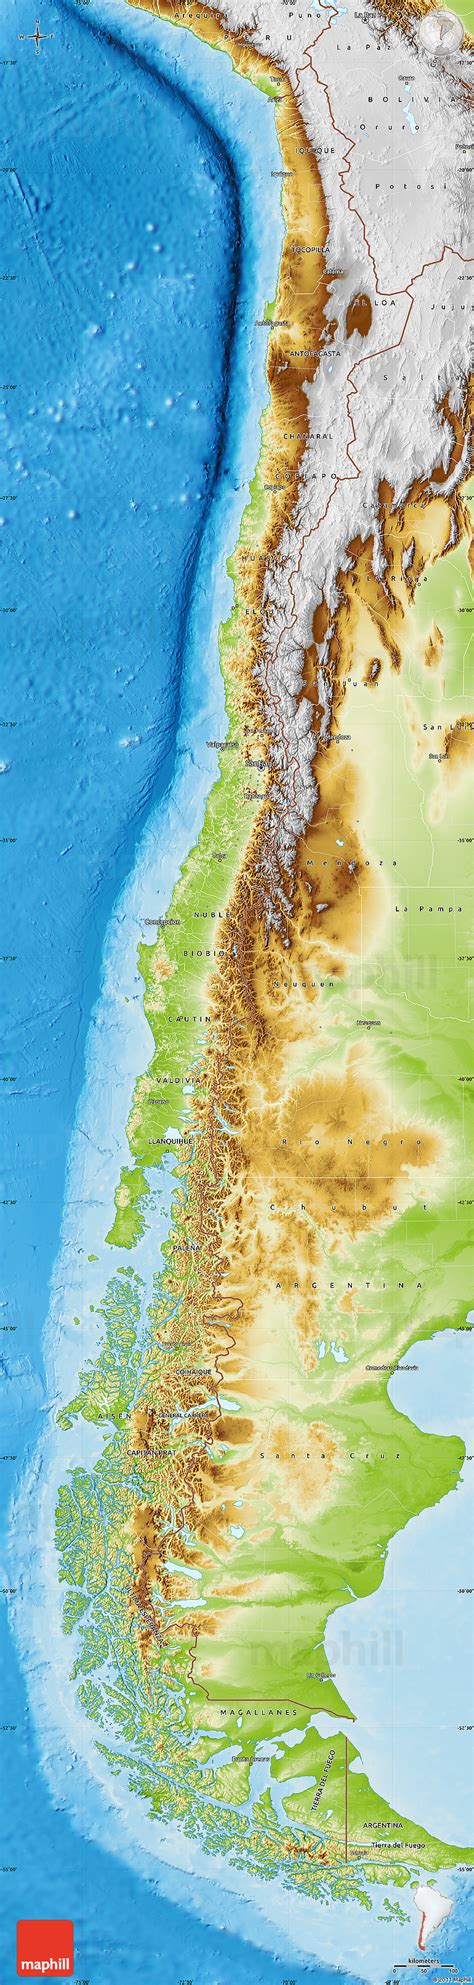 Physical Map of Chile